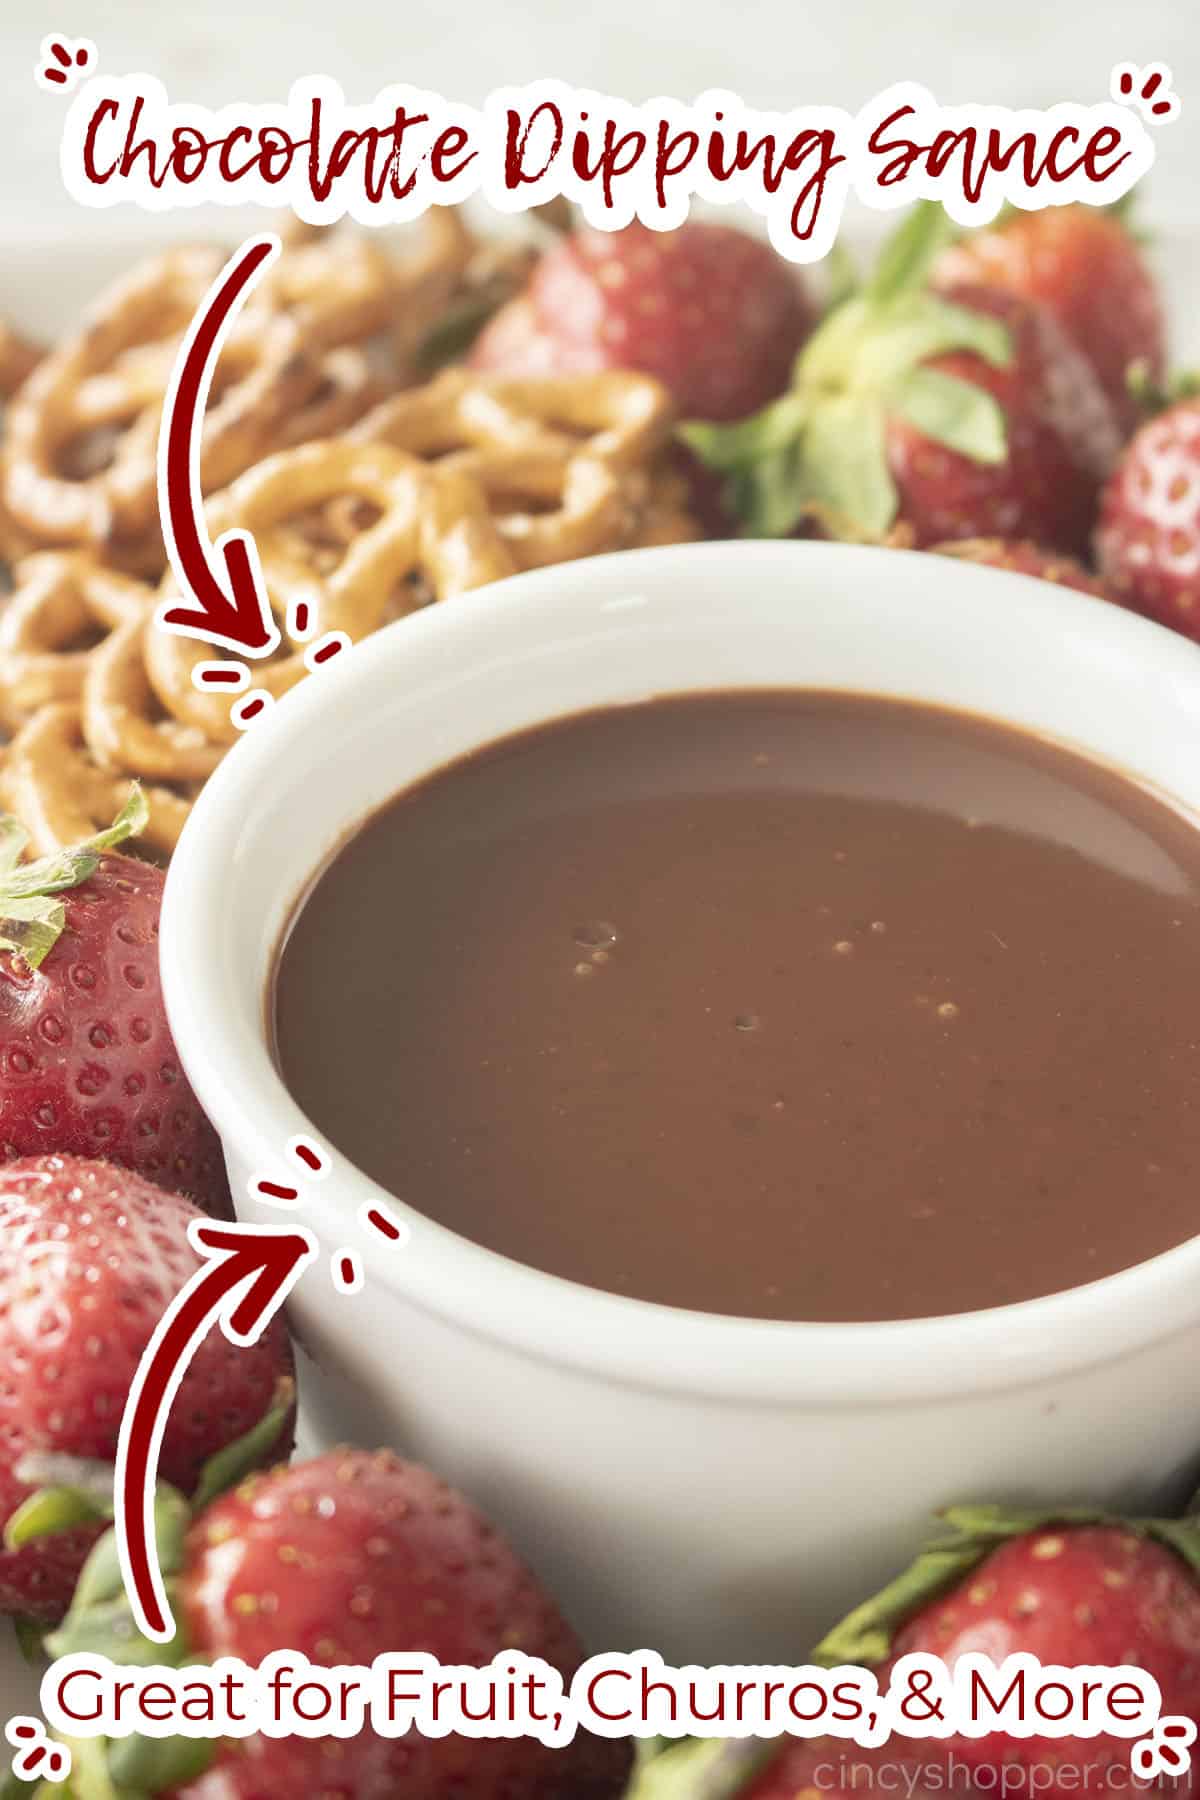 Text on image Chocolate Dipping Sauce. Great for fruit, churros, & More